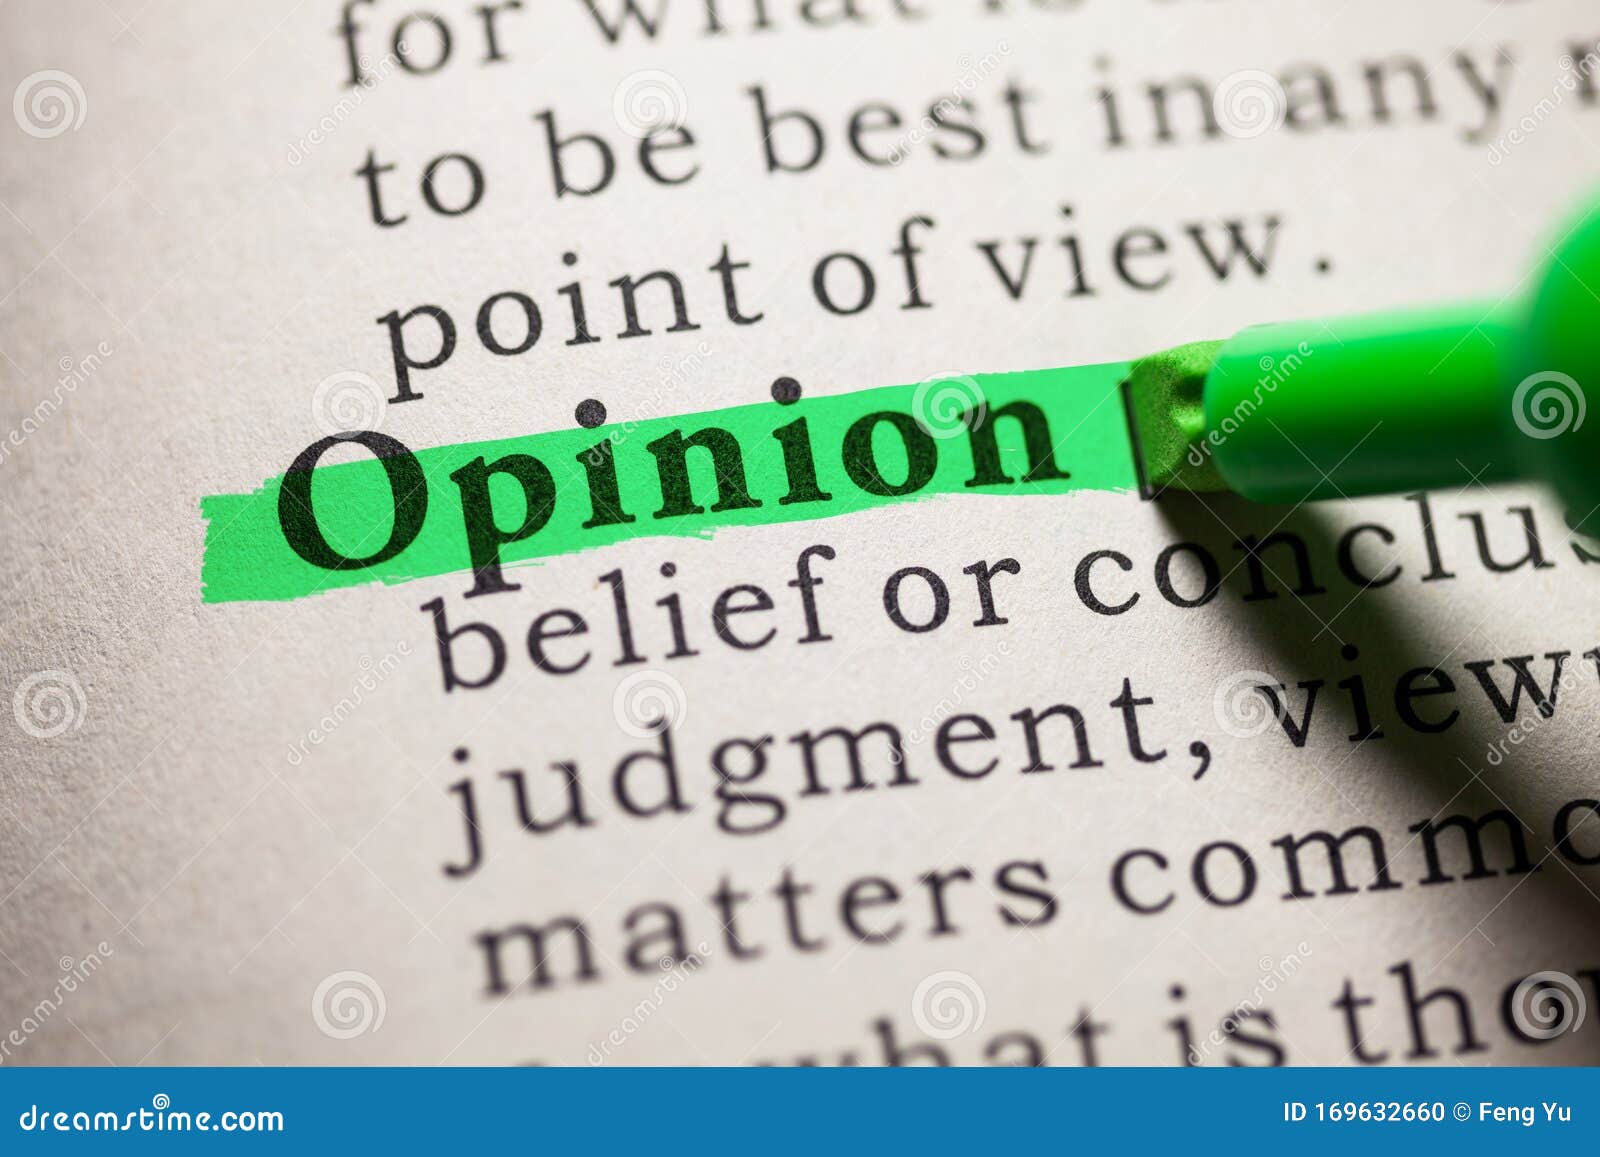 definition of the word opinion